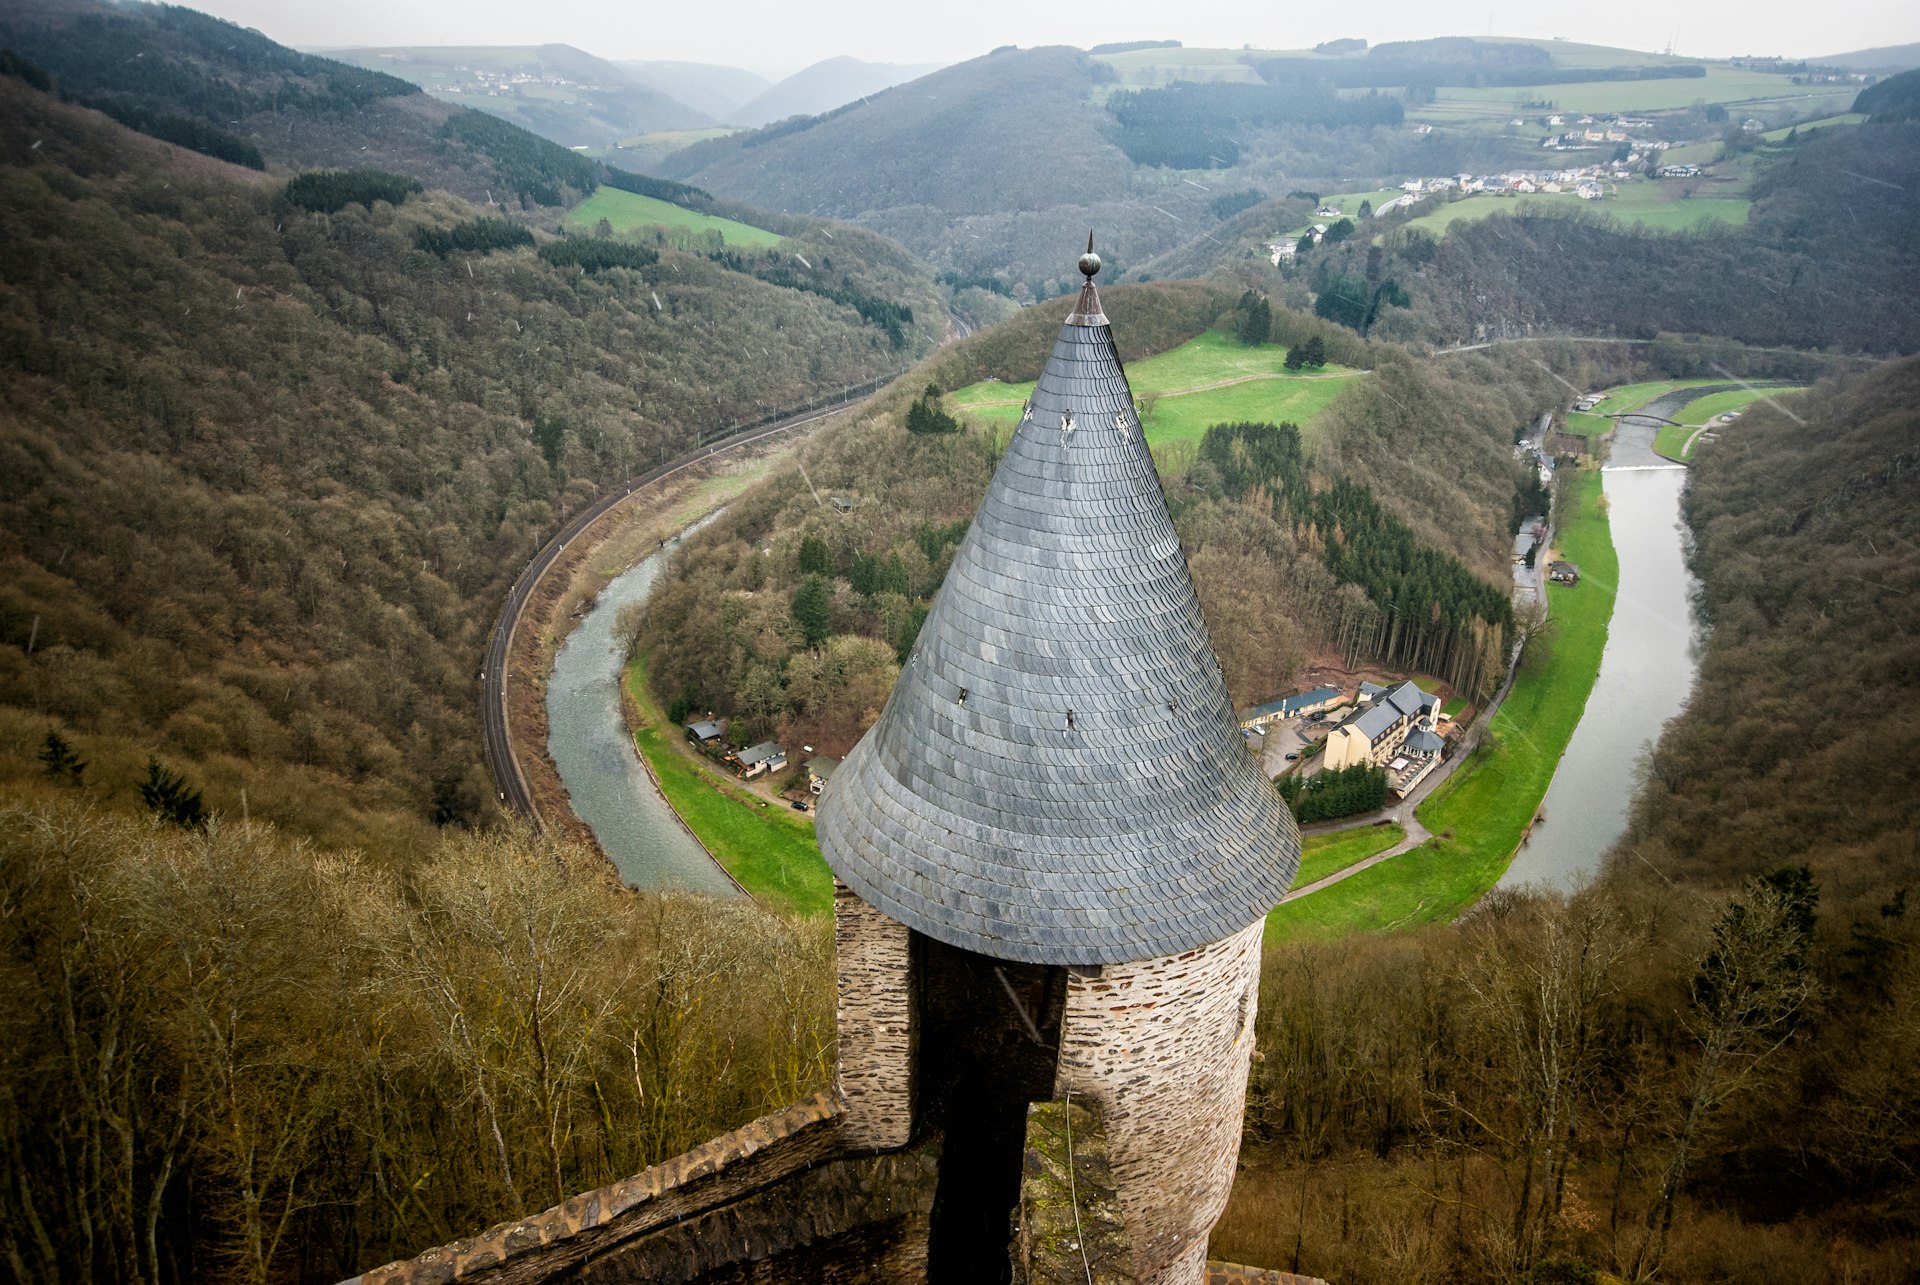 A view from Château de Bourscheid, the largest castle in Luxembourg, Europe